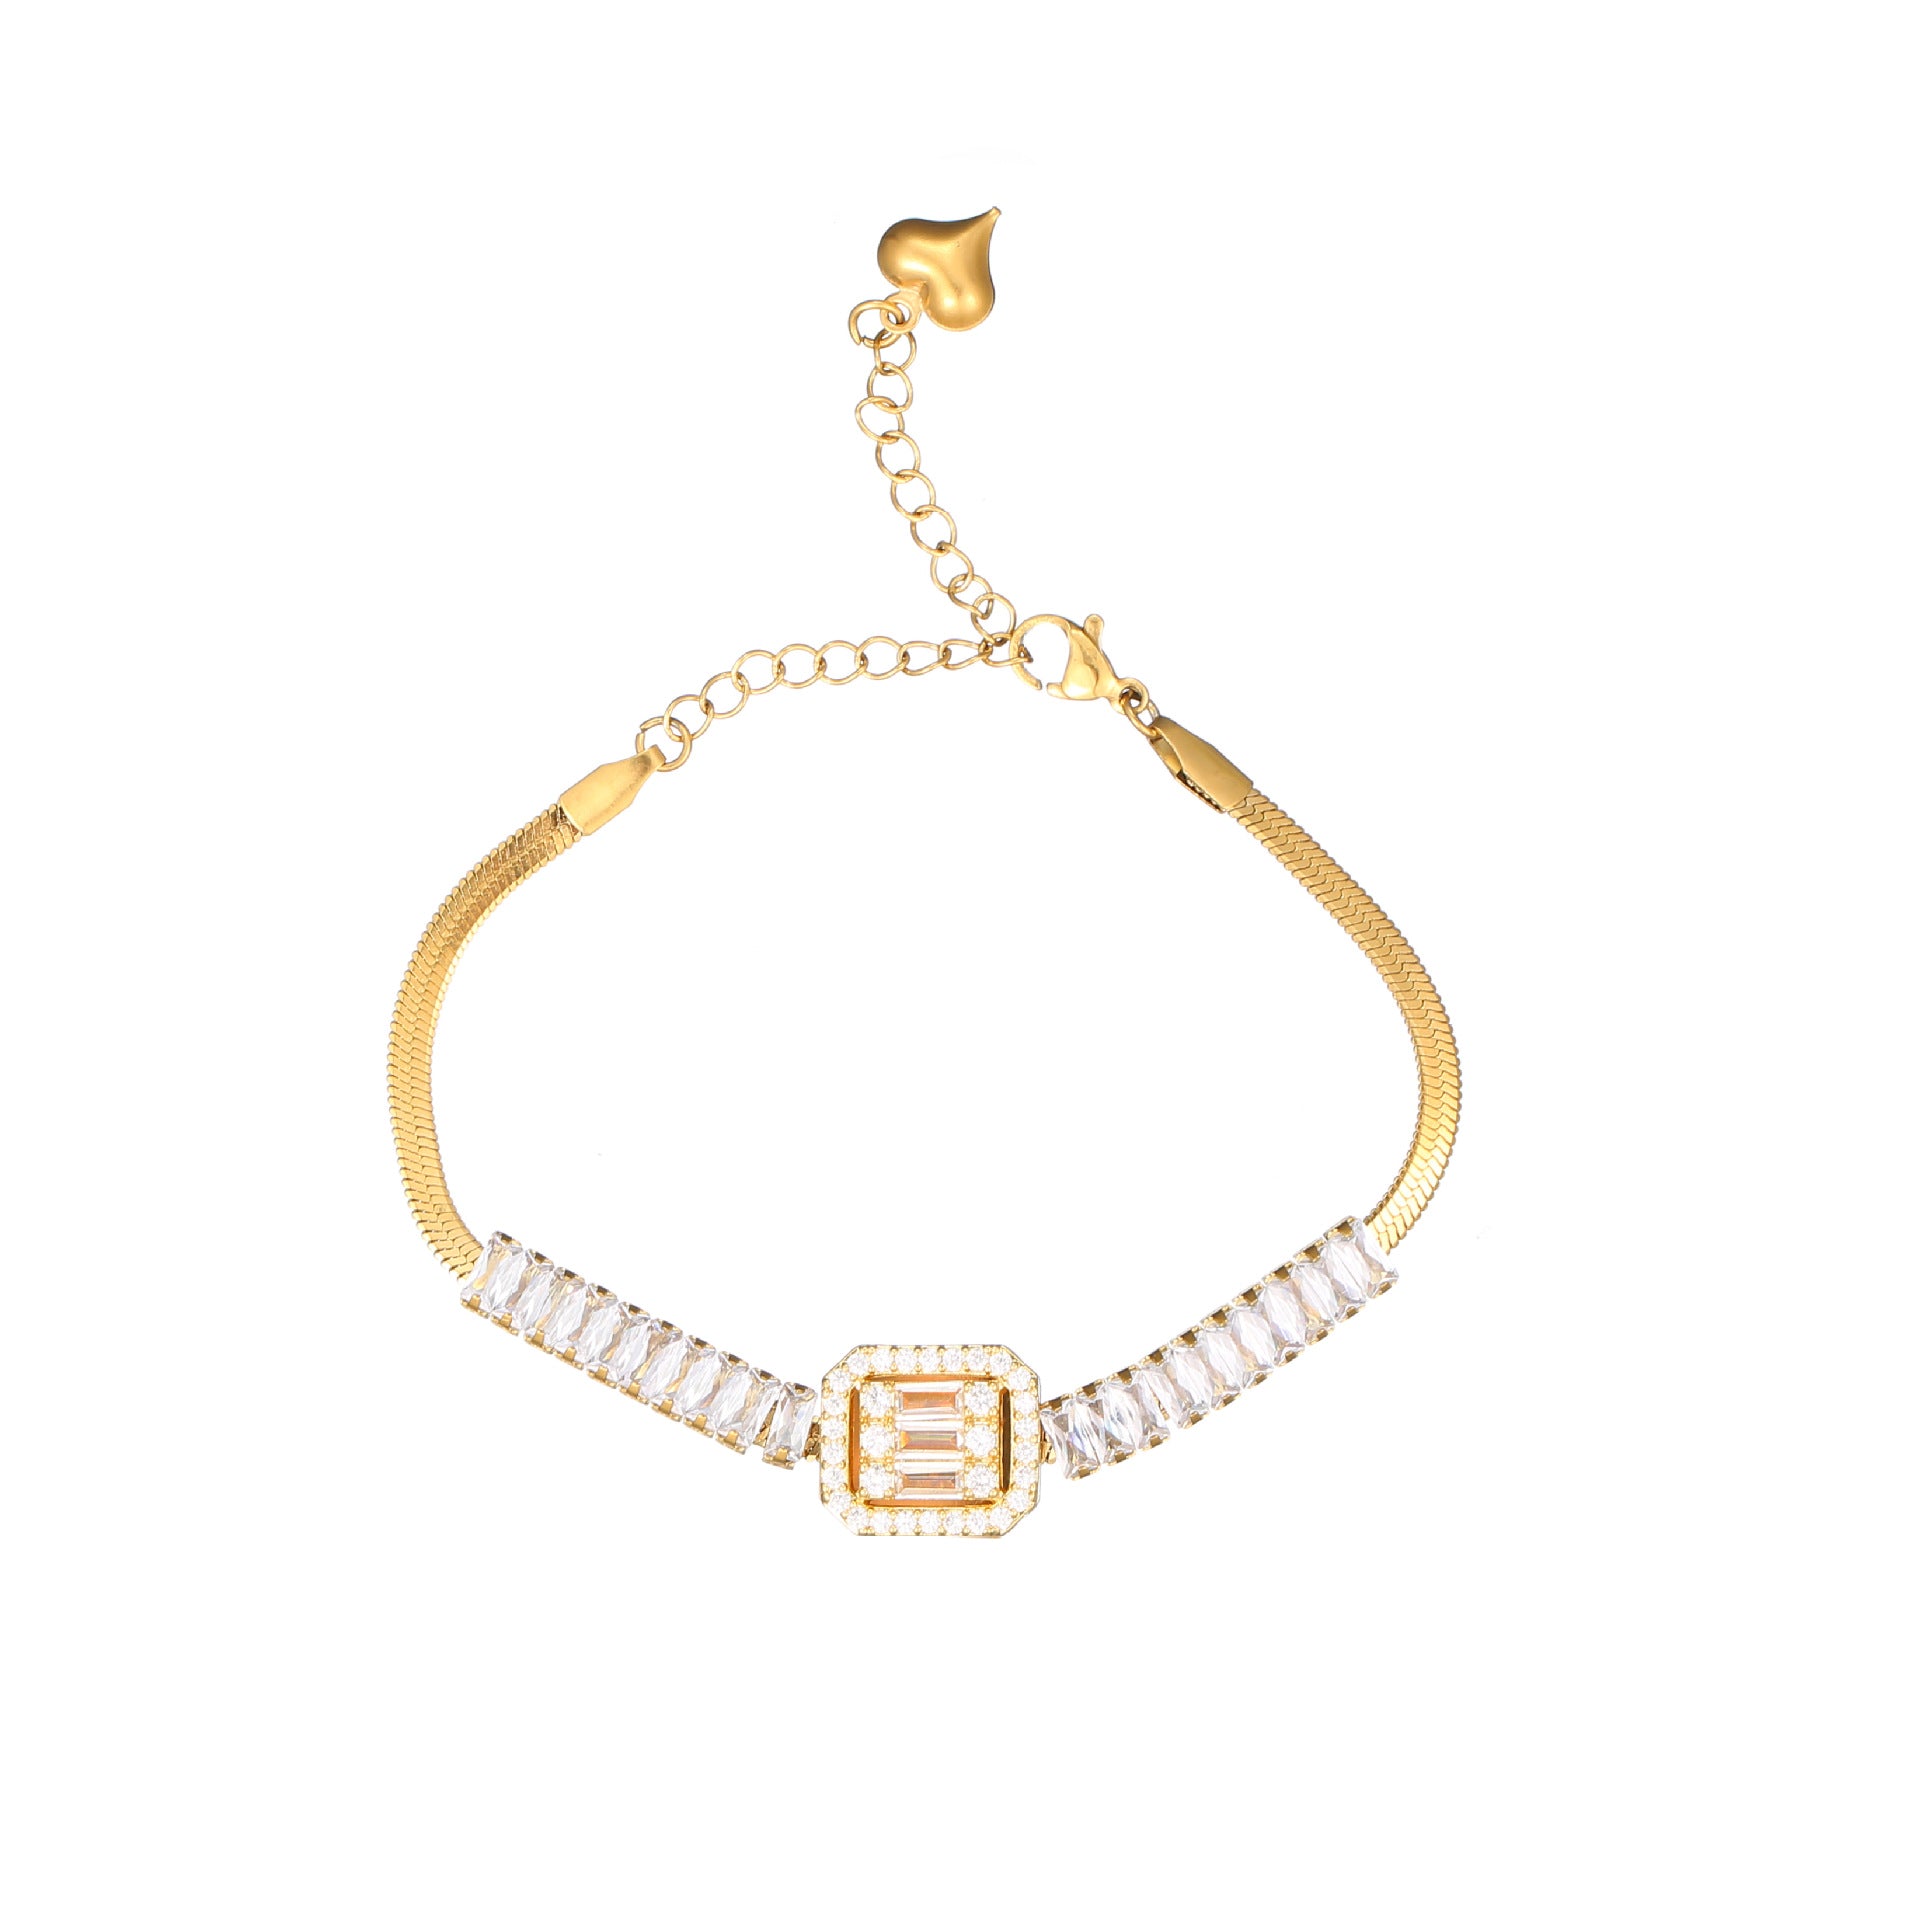 Bold and Glamorous Zircon-Inlaid Women's Cuban Link Bracelet  with Unique Personality  UponBasics Square Golden 